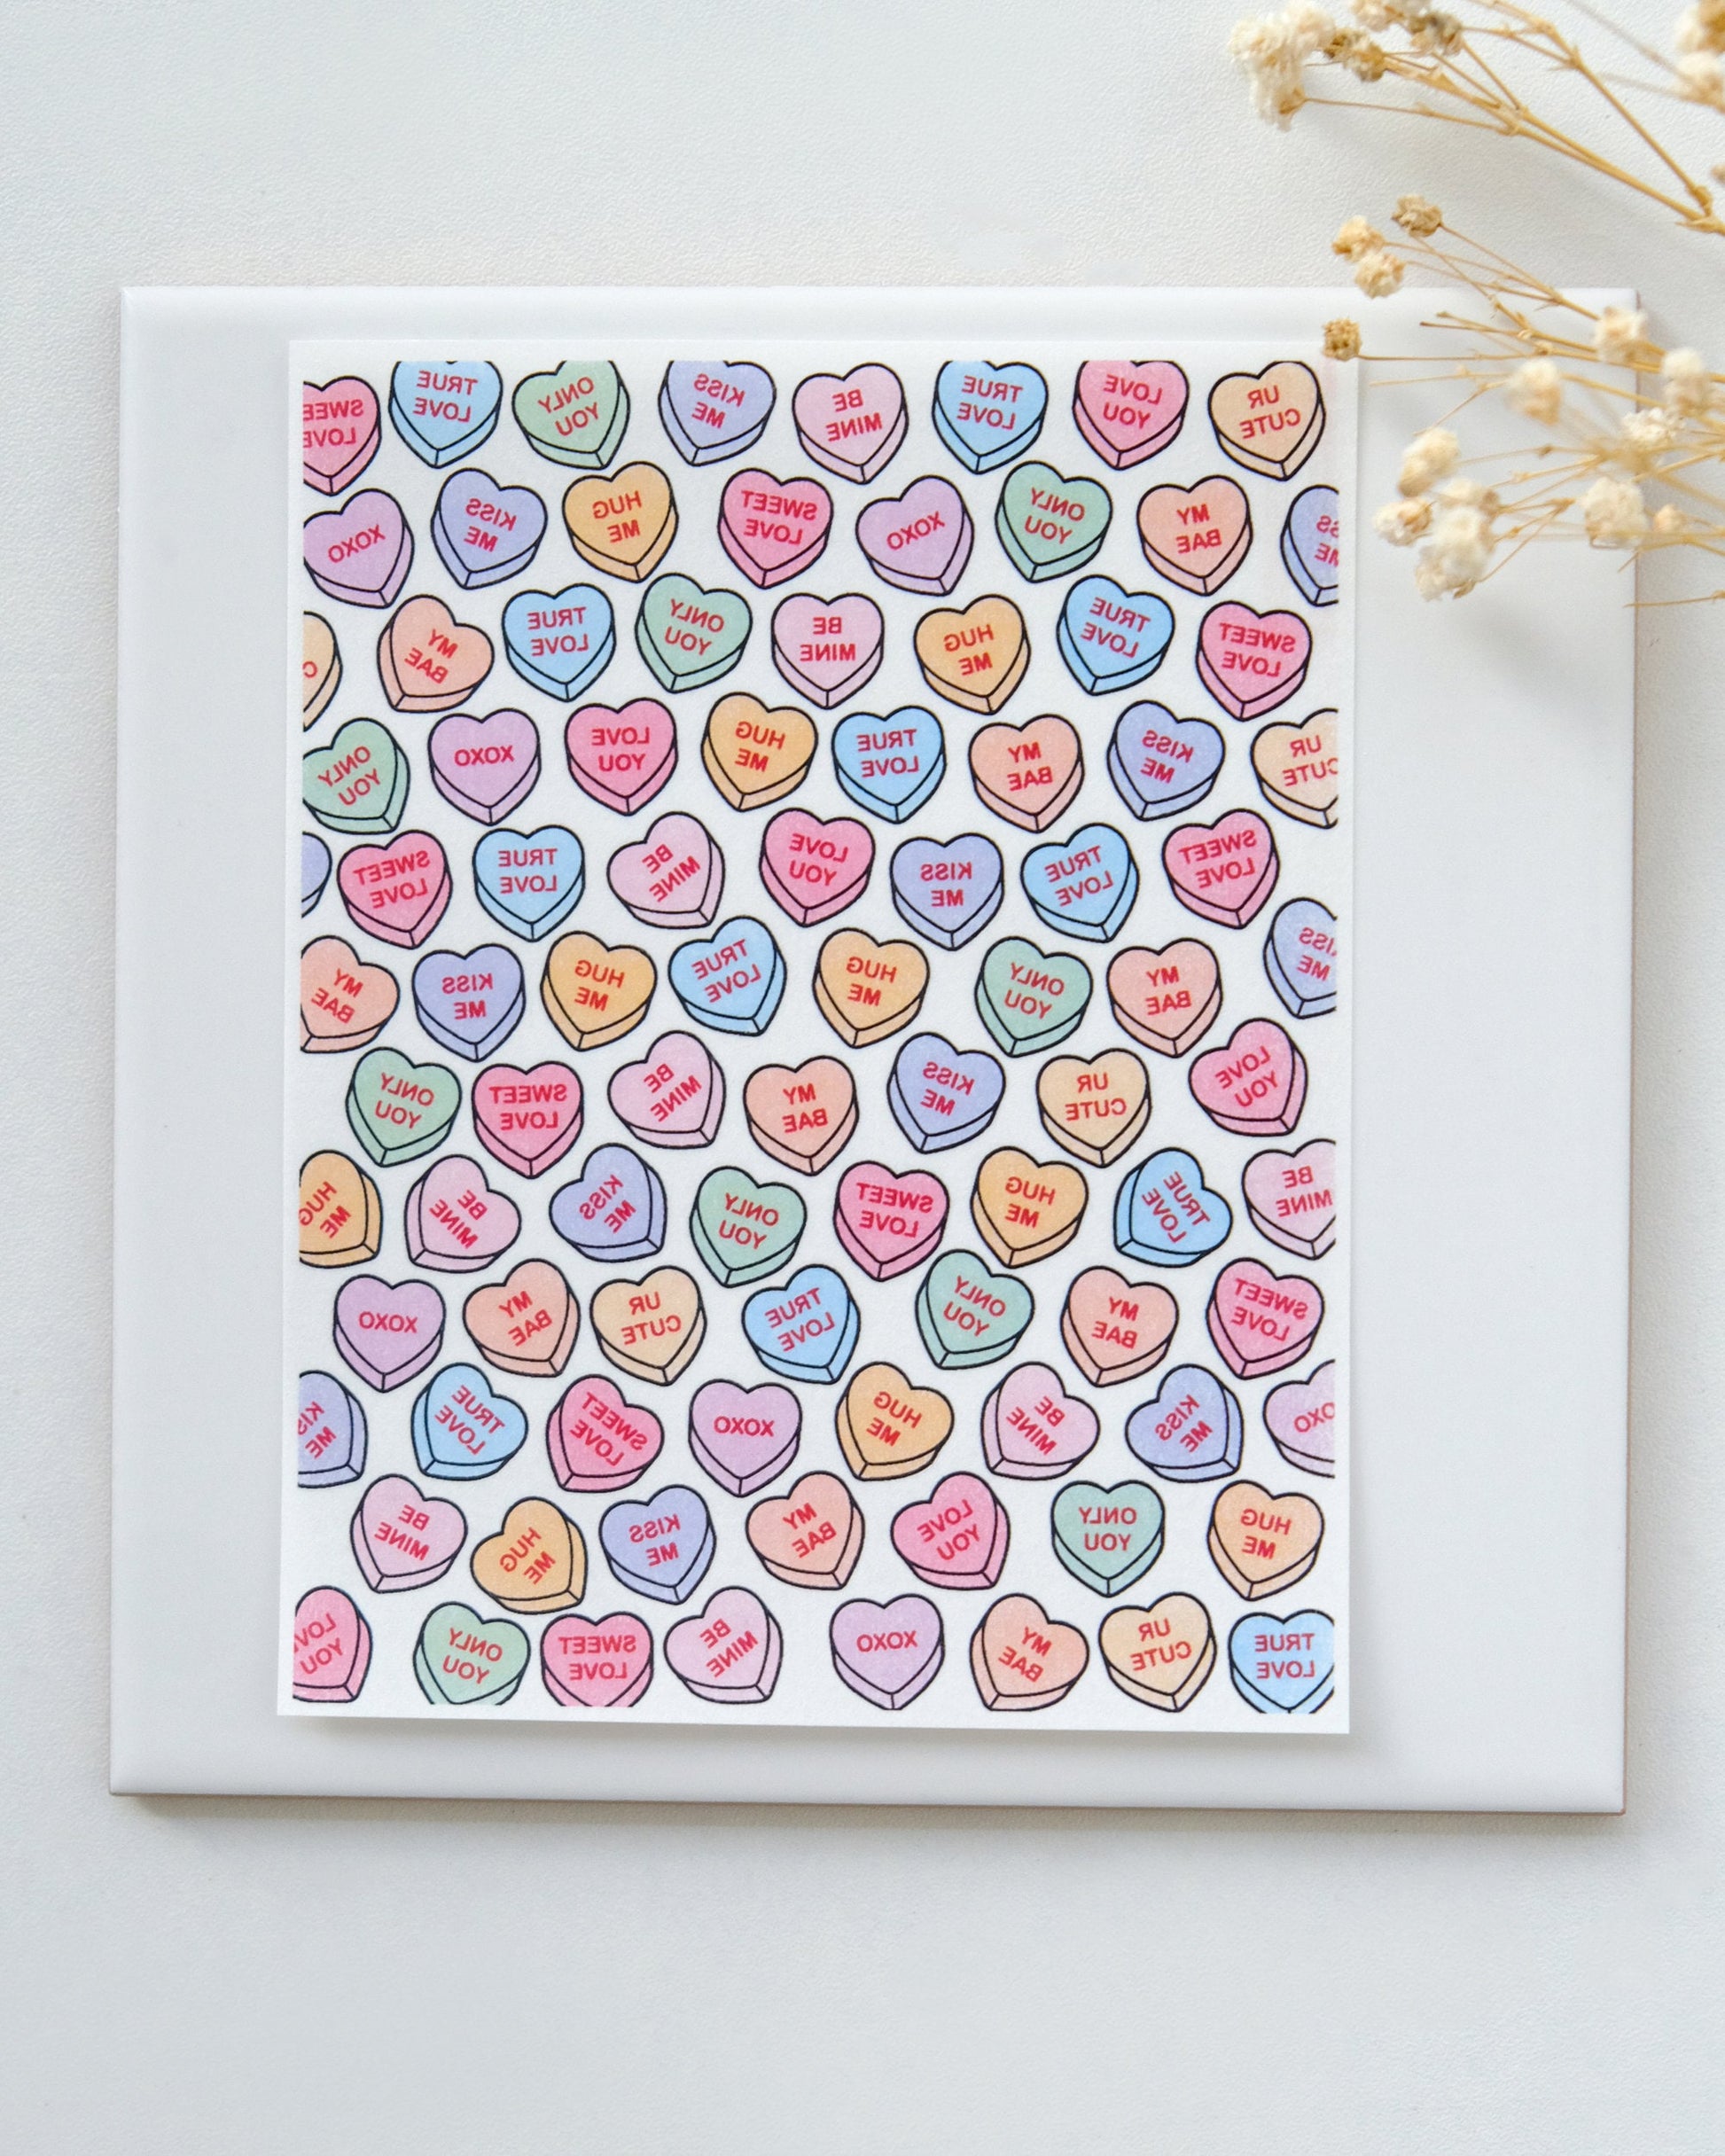 Conversation Heart Valentines Clay Transfer Paper – RoseauxClayCo